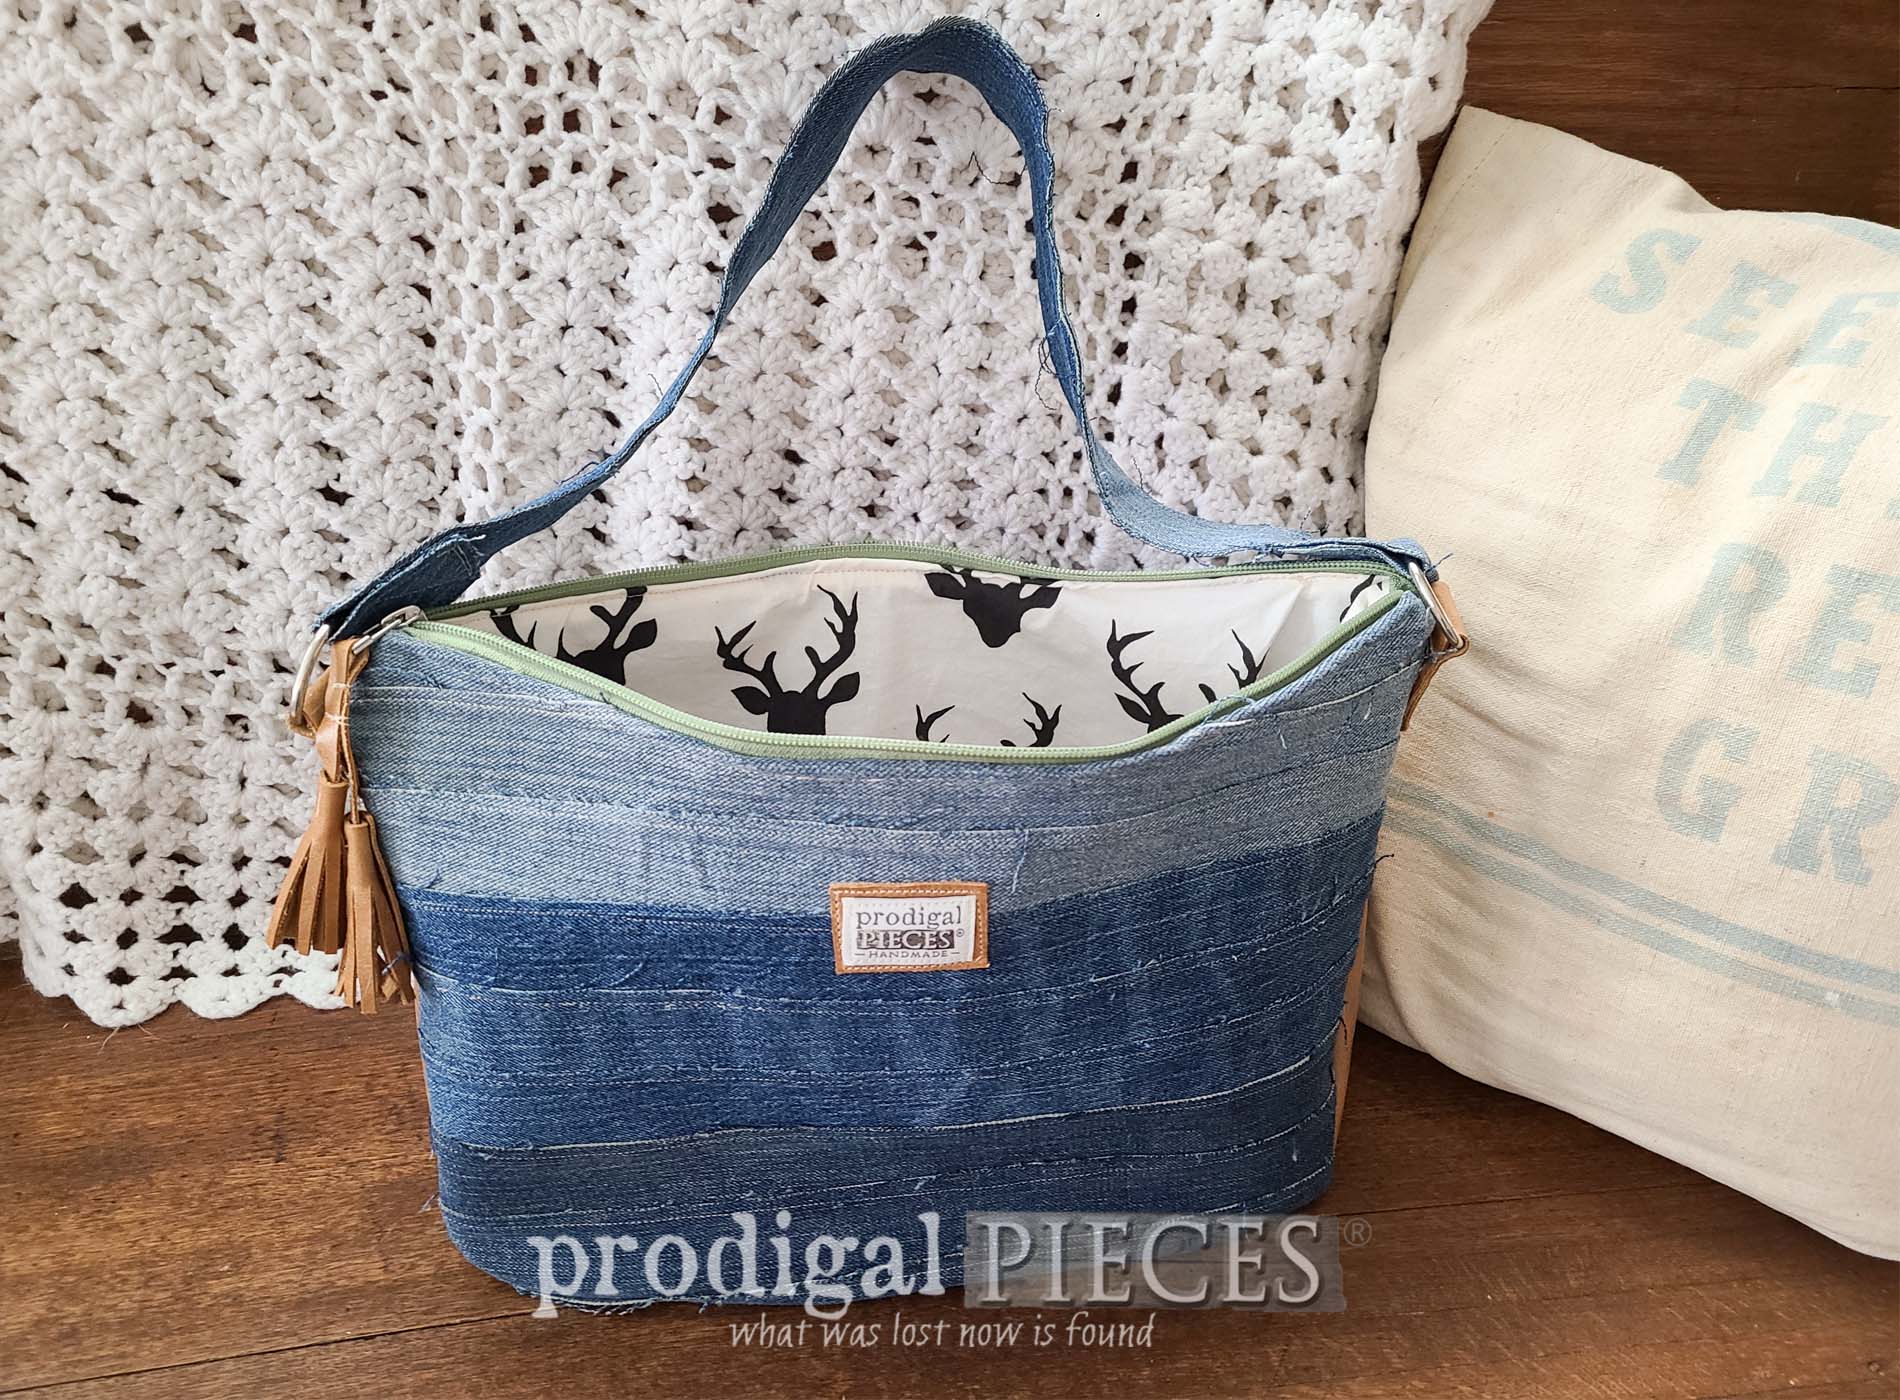 Featured DIY Denim Bag in Ombre Hobo Style Refashion by Larissa of Prodigal Pieces | prodigalpieces.com #prodigalpieces #diy #sewing #refashion #bags